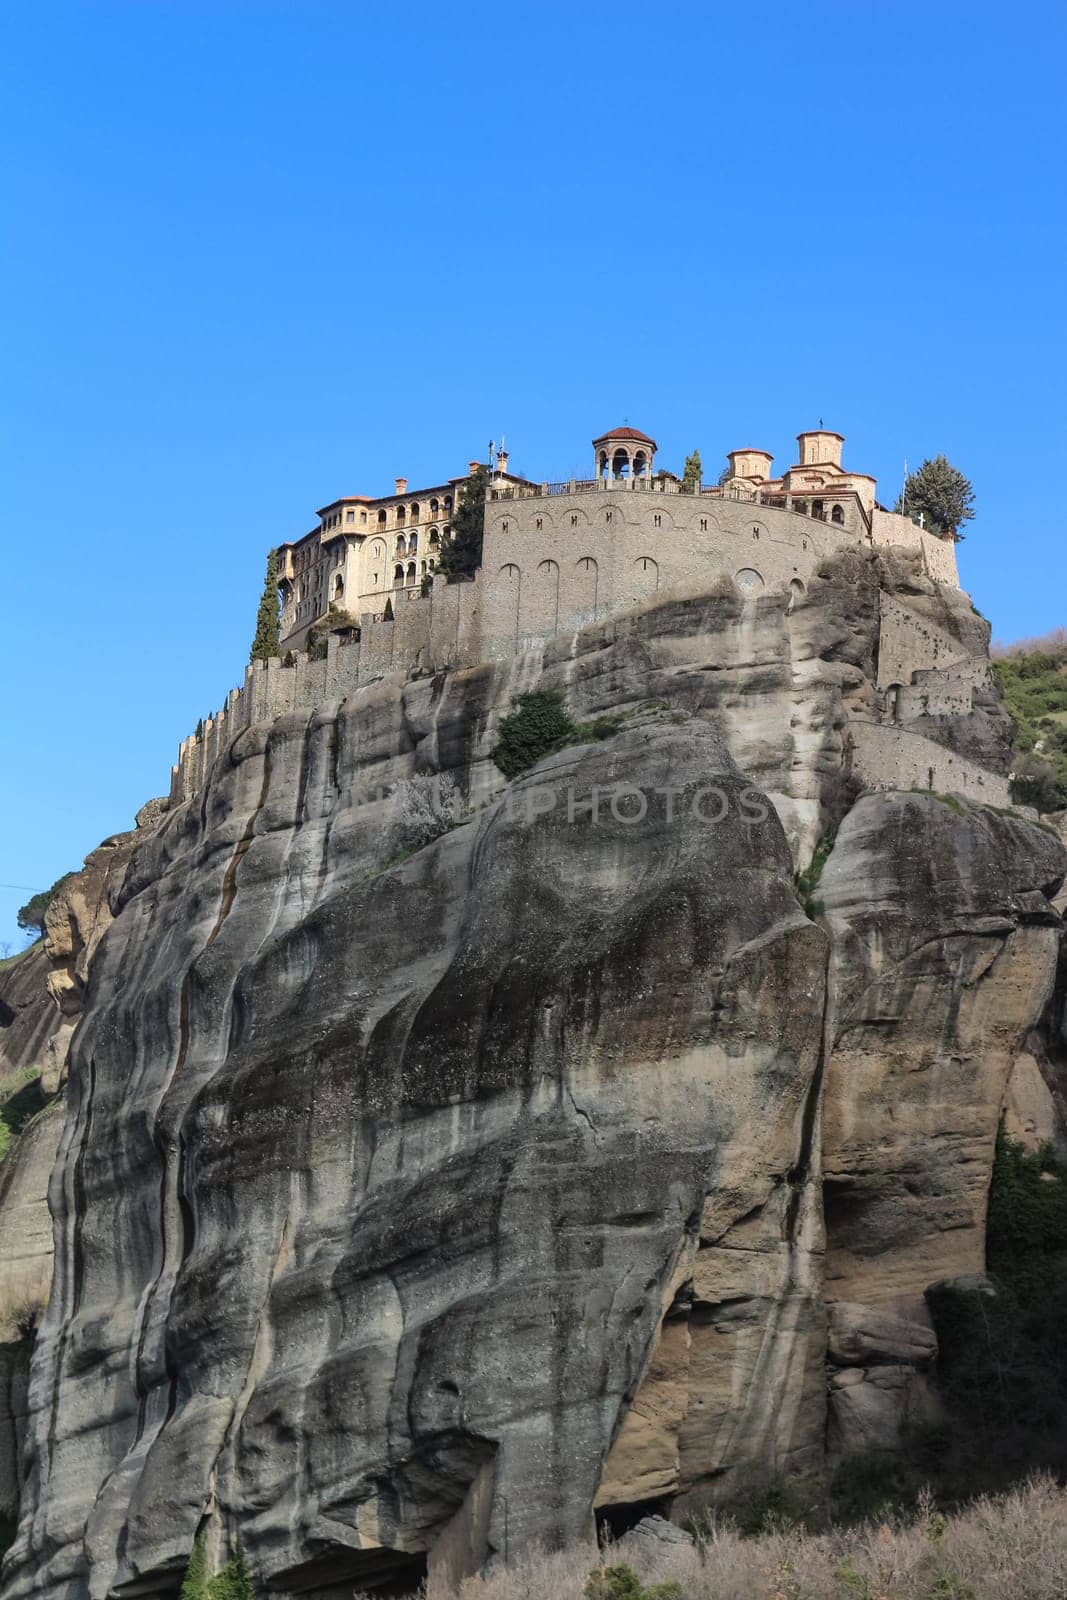 Discover the divine beauty and spiritual allure of the churches that grace the cliffs of Meteora, Greece